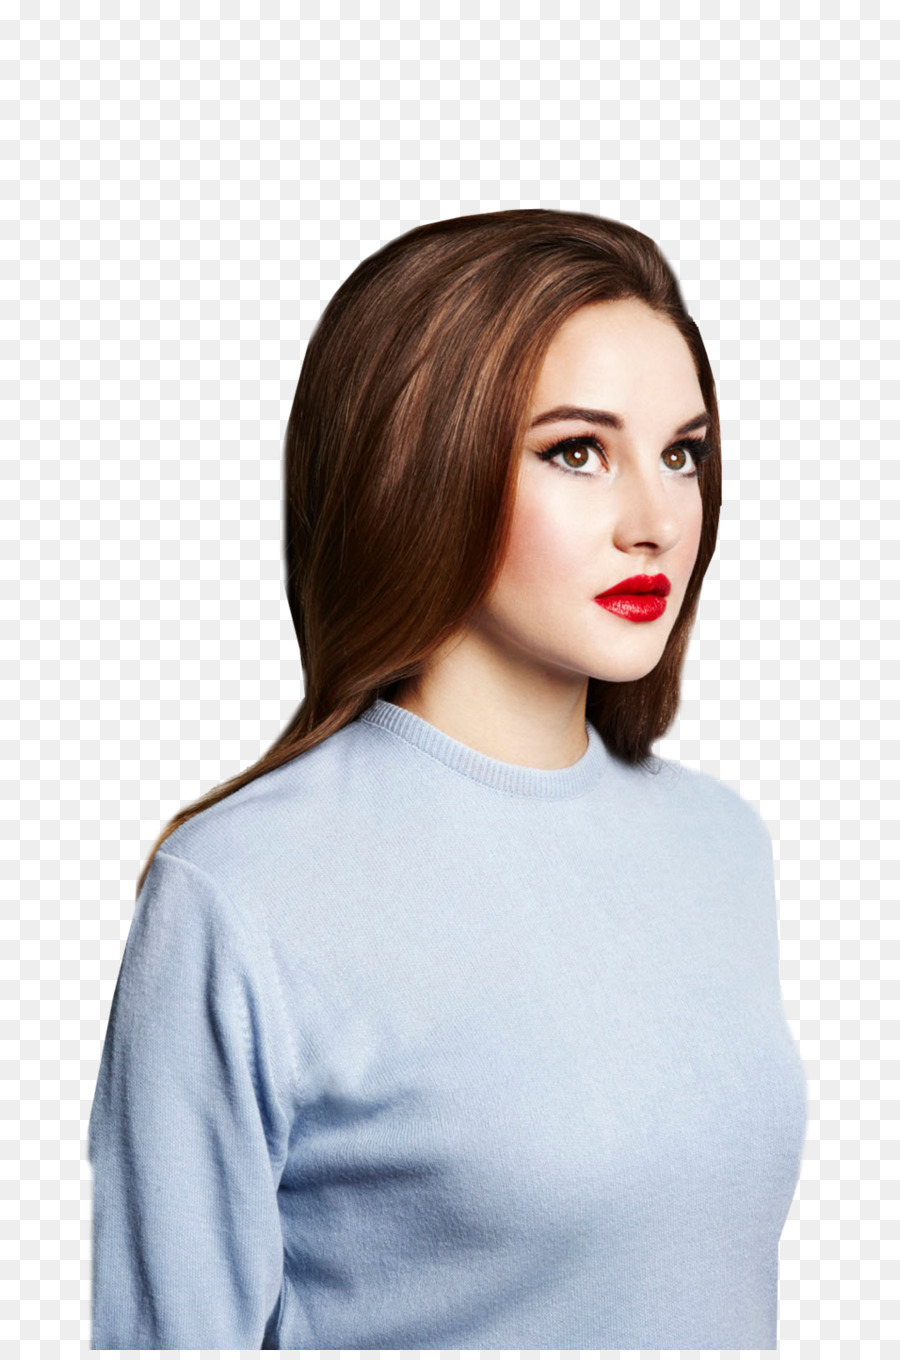 Shailene Woodley Mary Jane Watson Beatrice Prior The Secret Life of the American Teenager - Shailene Woodley PNG Transparent Picture png download - 1024*1536 - Free Transparent  png Download.